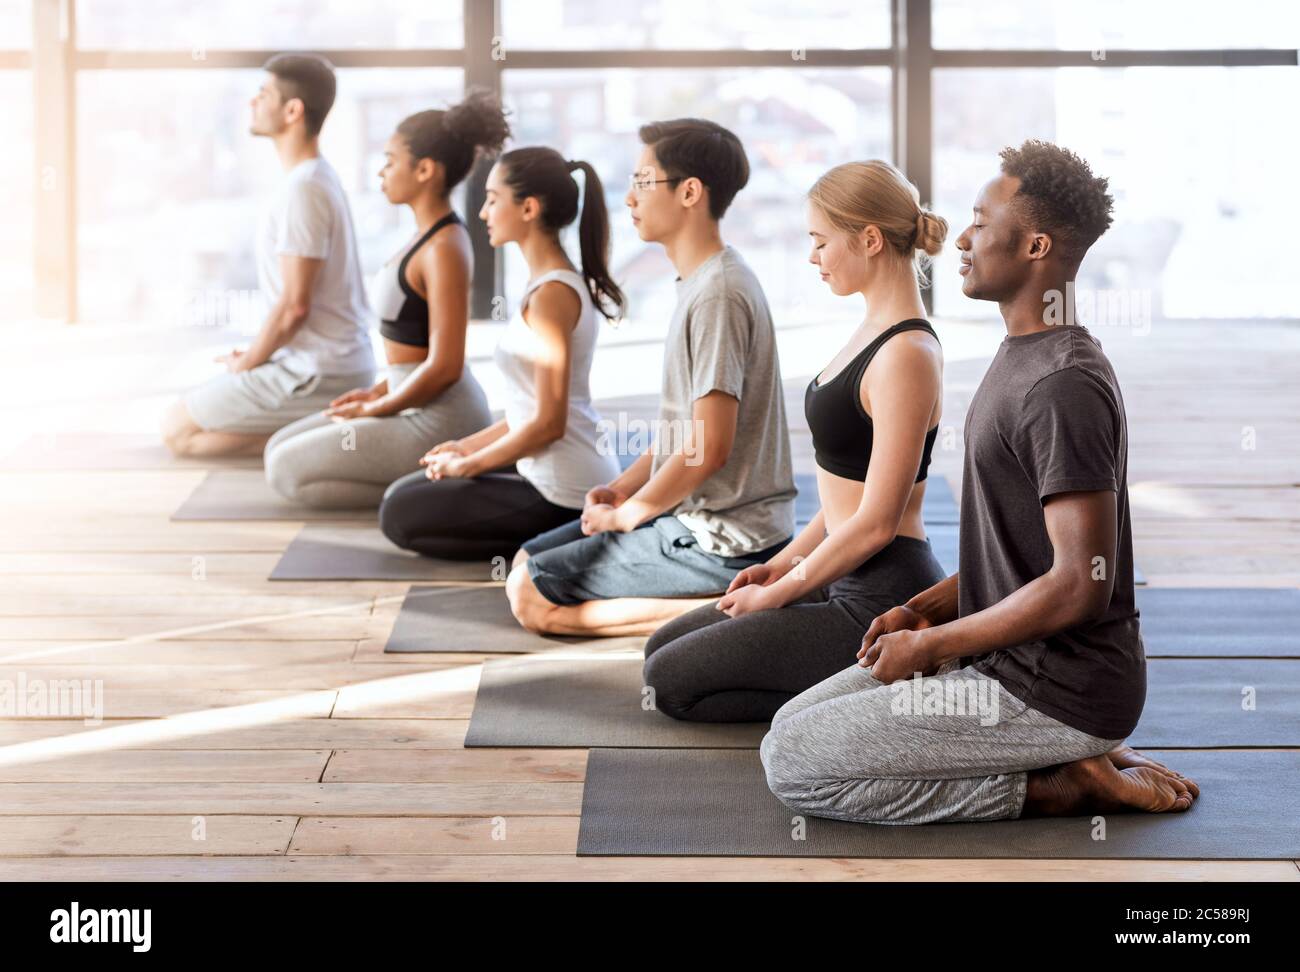 Wellness Concept. Young sporty people in yoga class making meditation exercises together Stock Photo